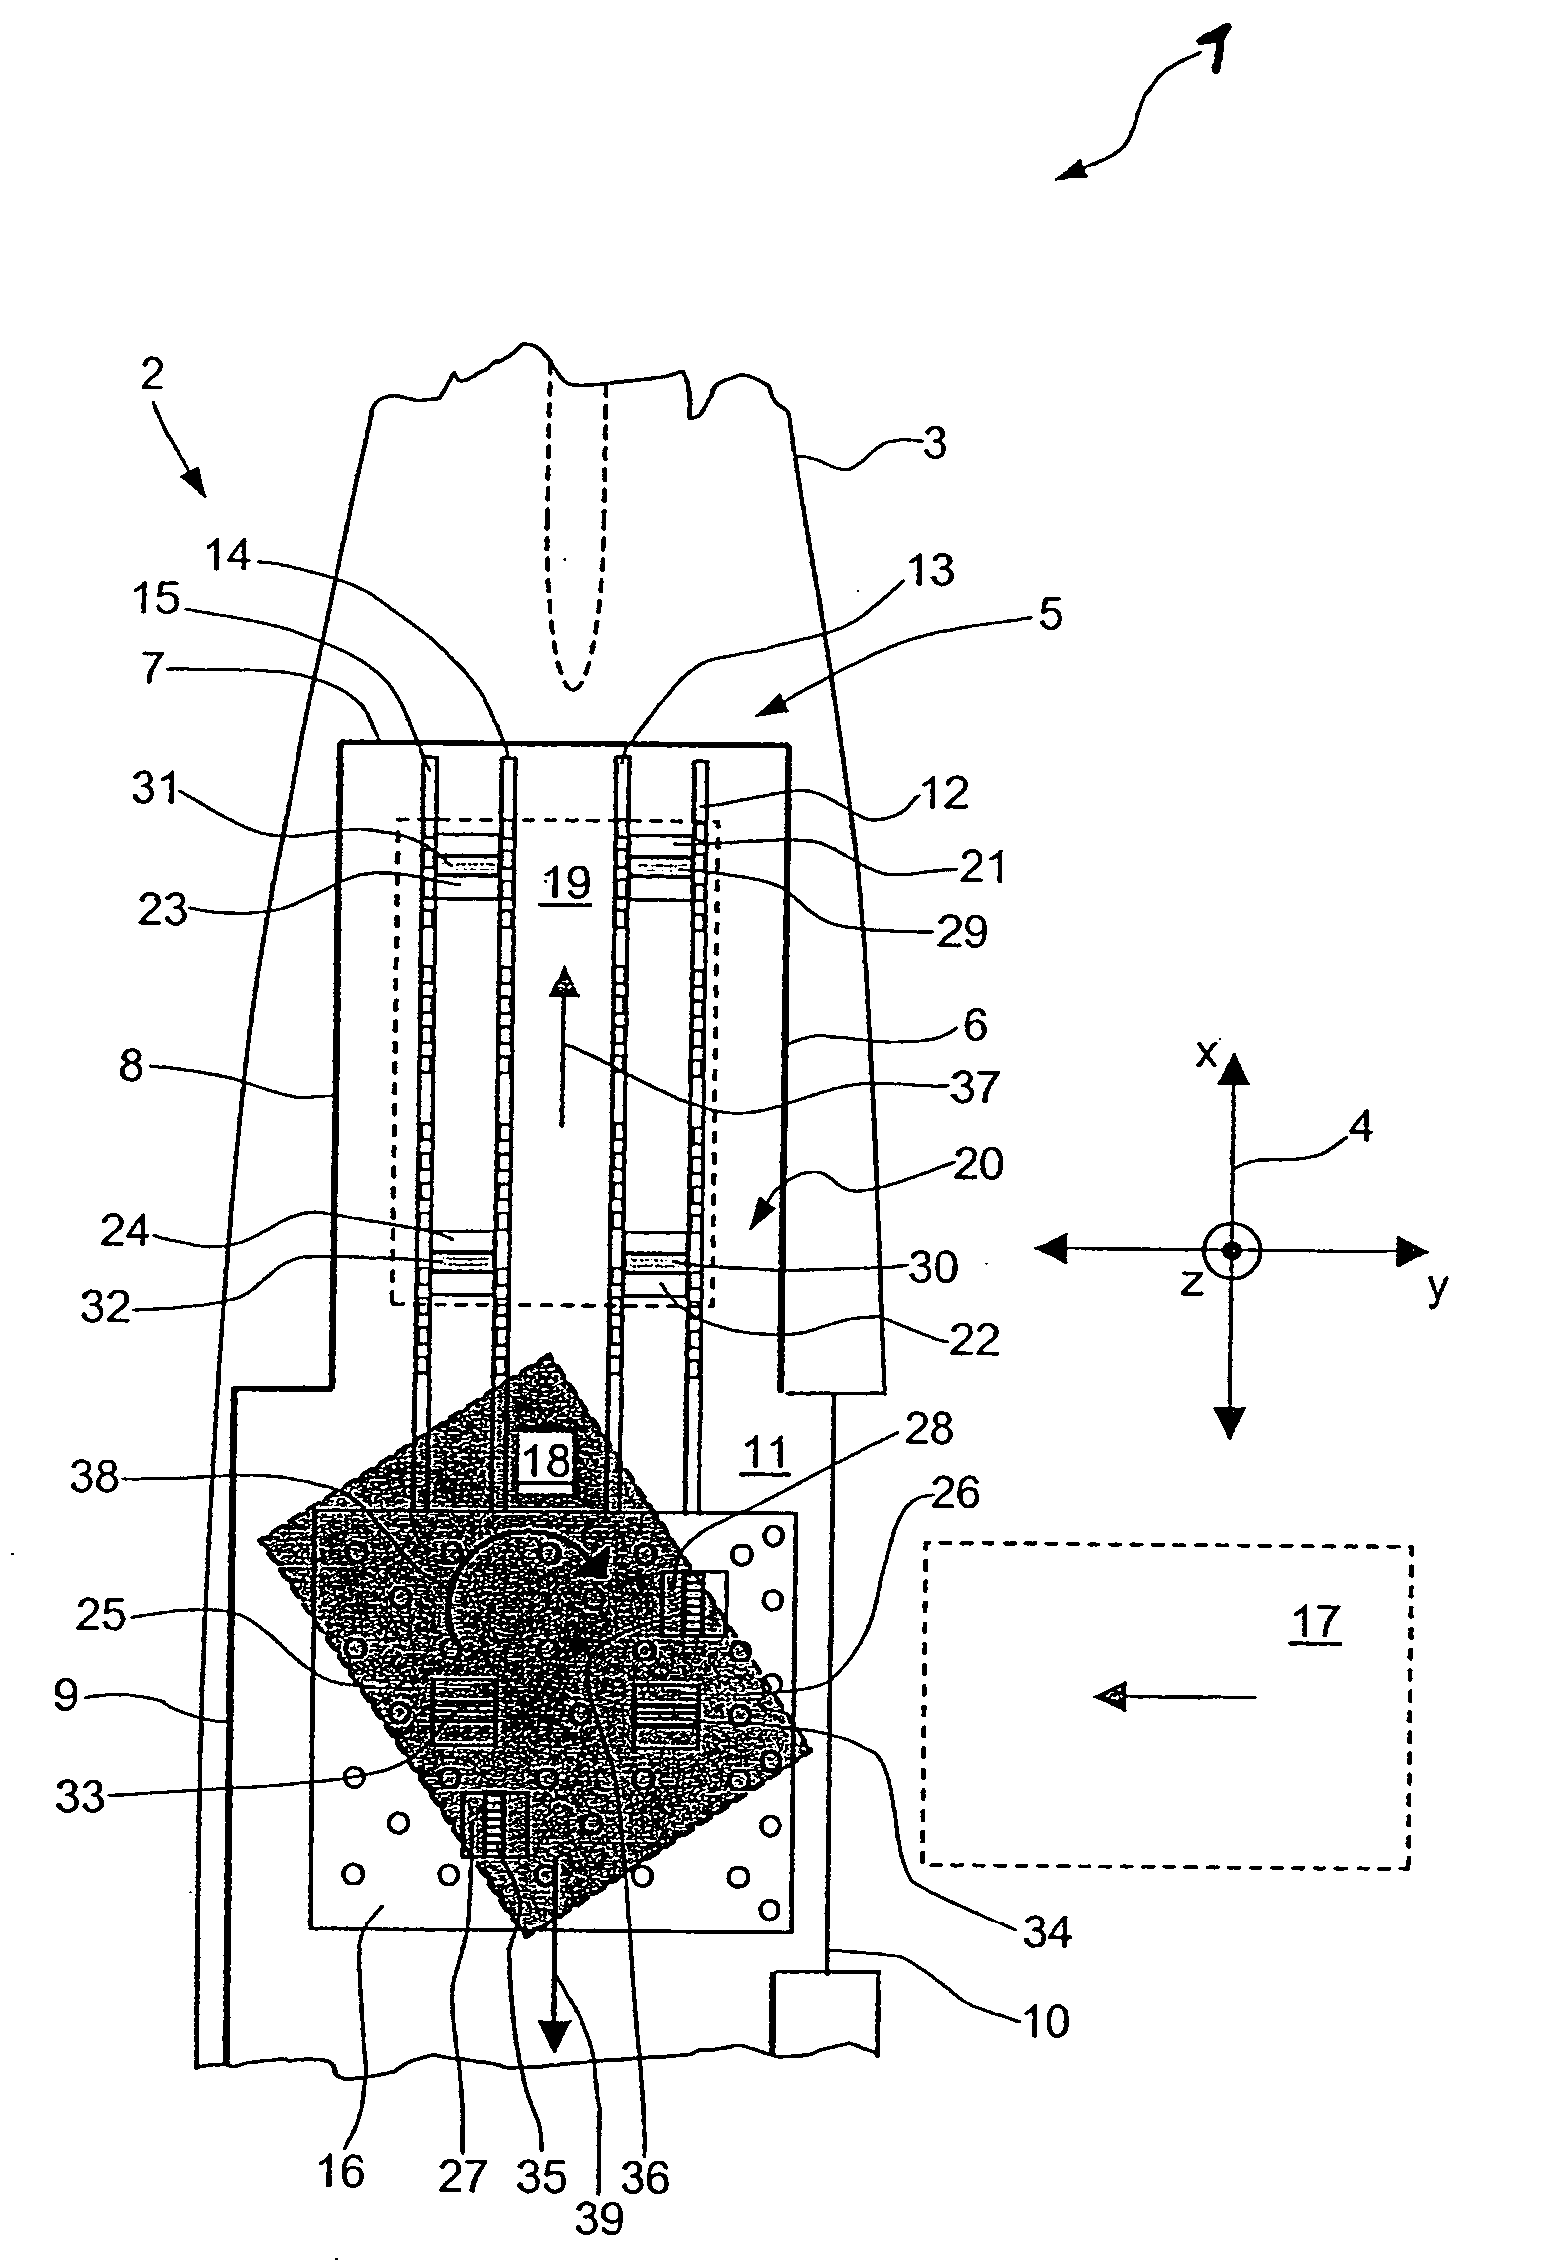 Loading device for the at least partially automated loading and unloading of a cargo hold on transport equipment as well as a conveying system